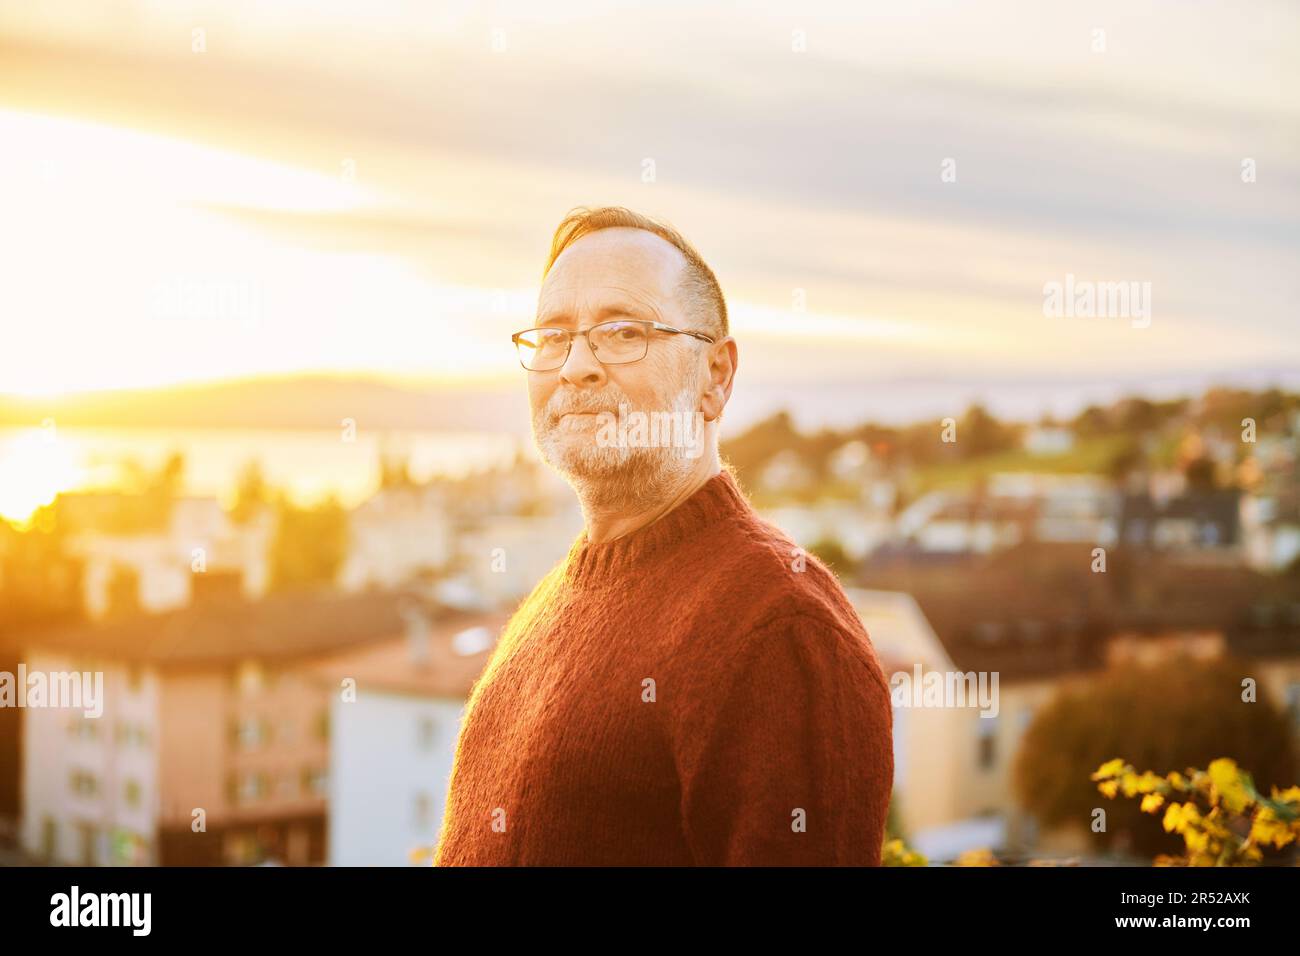 Outdoor portrait of middle age man in sunlight, town on background Stock Photo